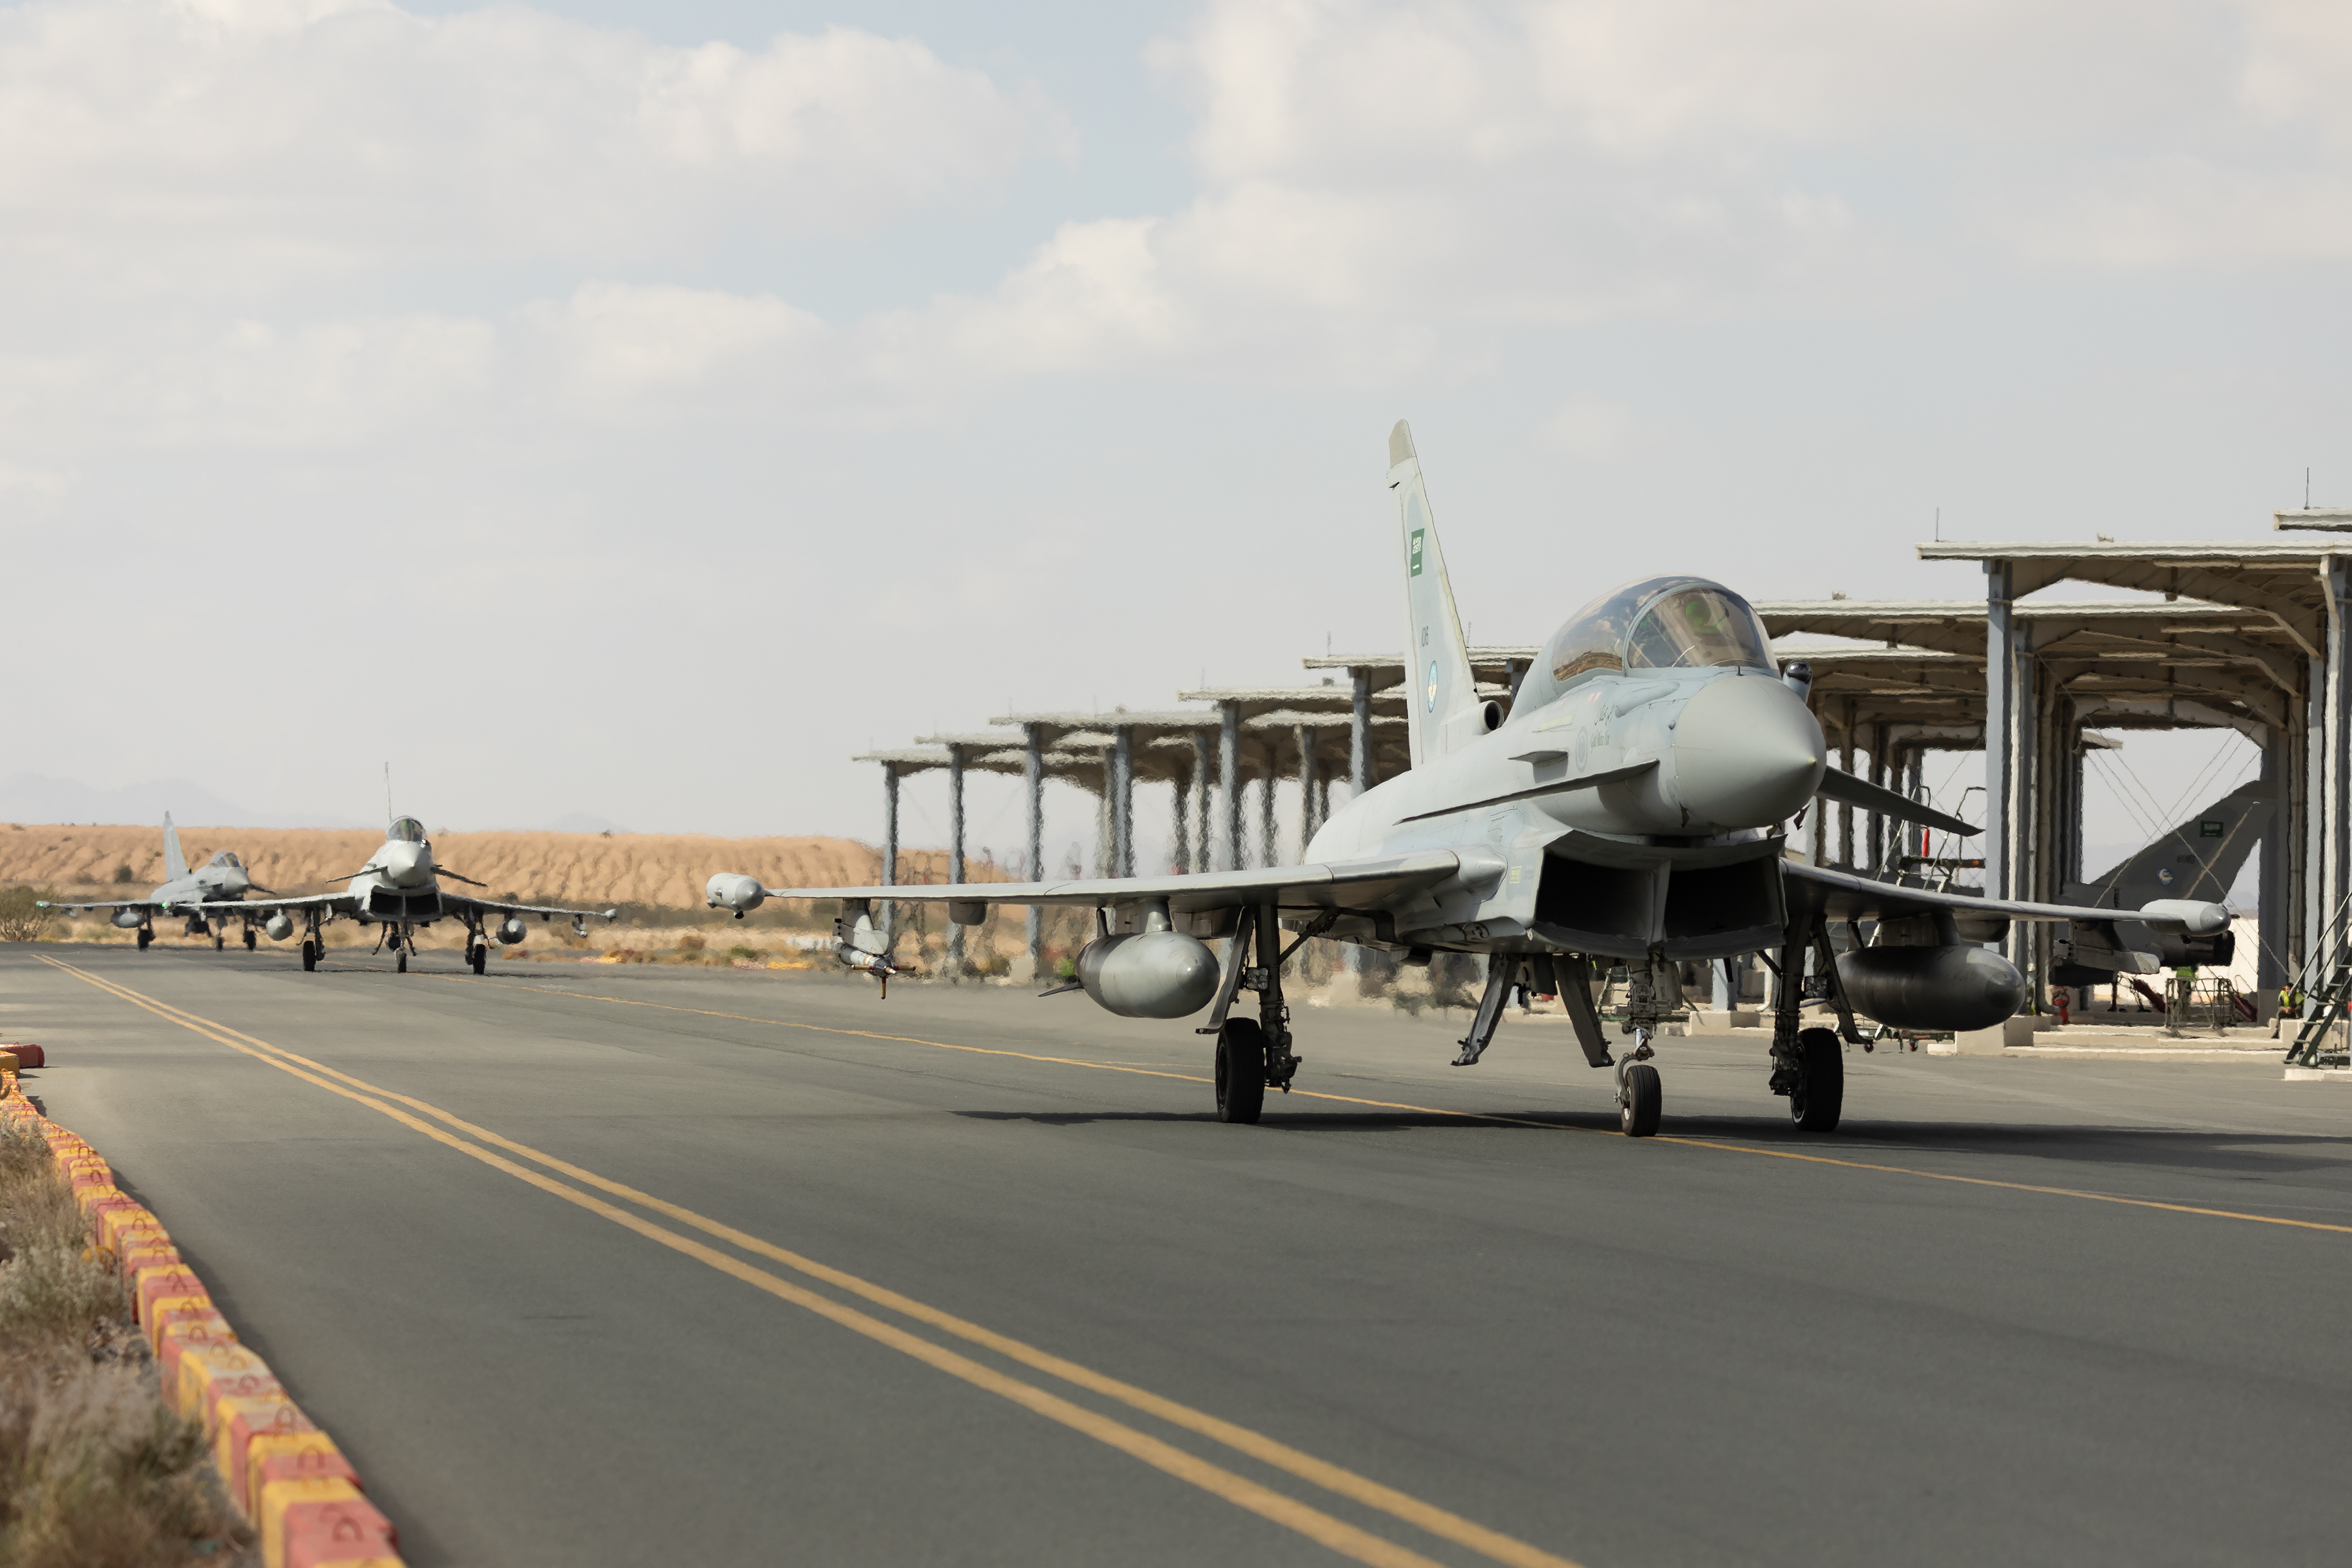 Image shows three RAF Typhoons taxiing on the airfield.